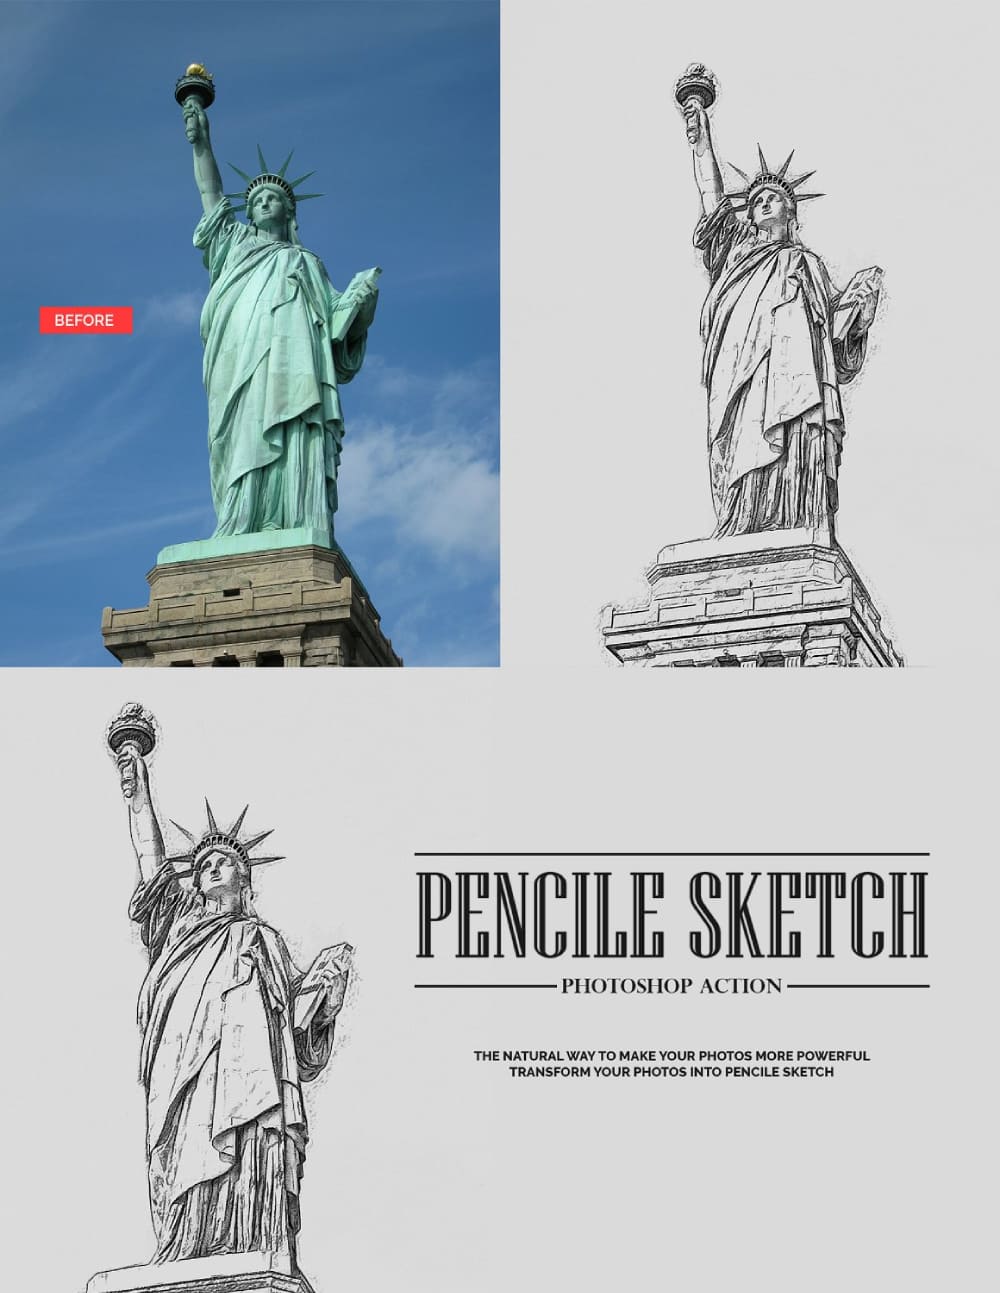 Collection of colorful images of the Statue of Liberty drawn in pencil.